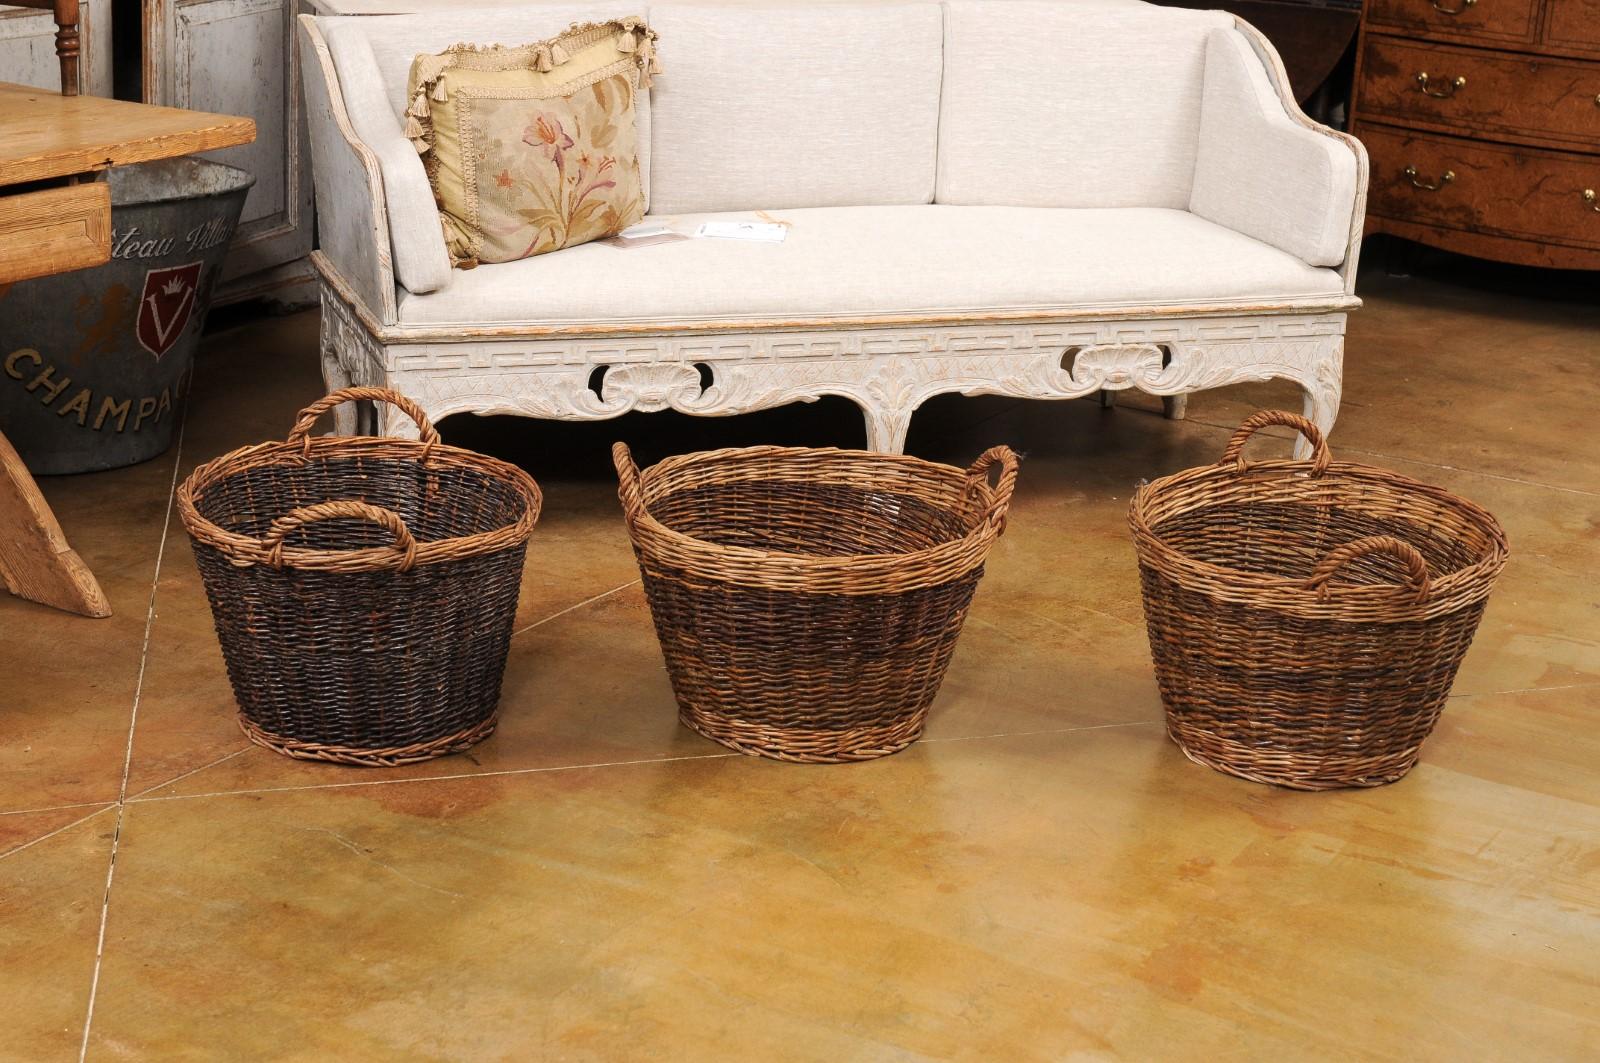 Handmade English Two Toned Wicker Baskets from Devon with Double Handles, Each 4